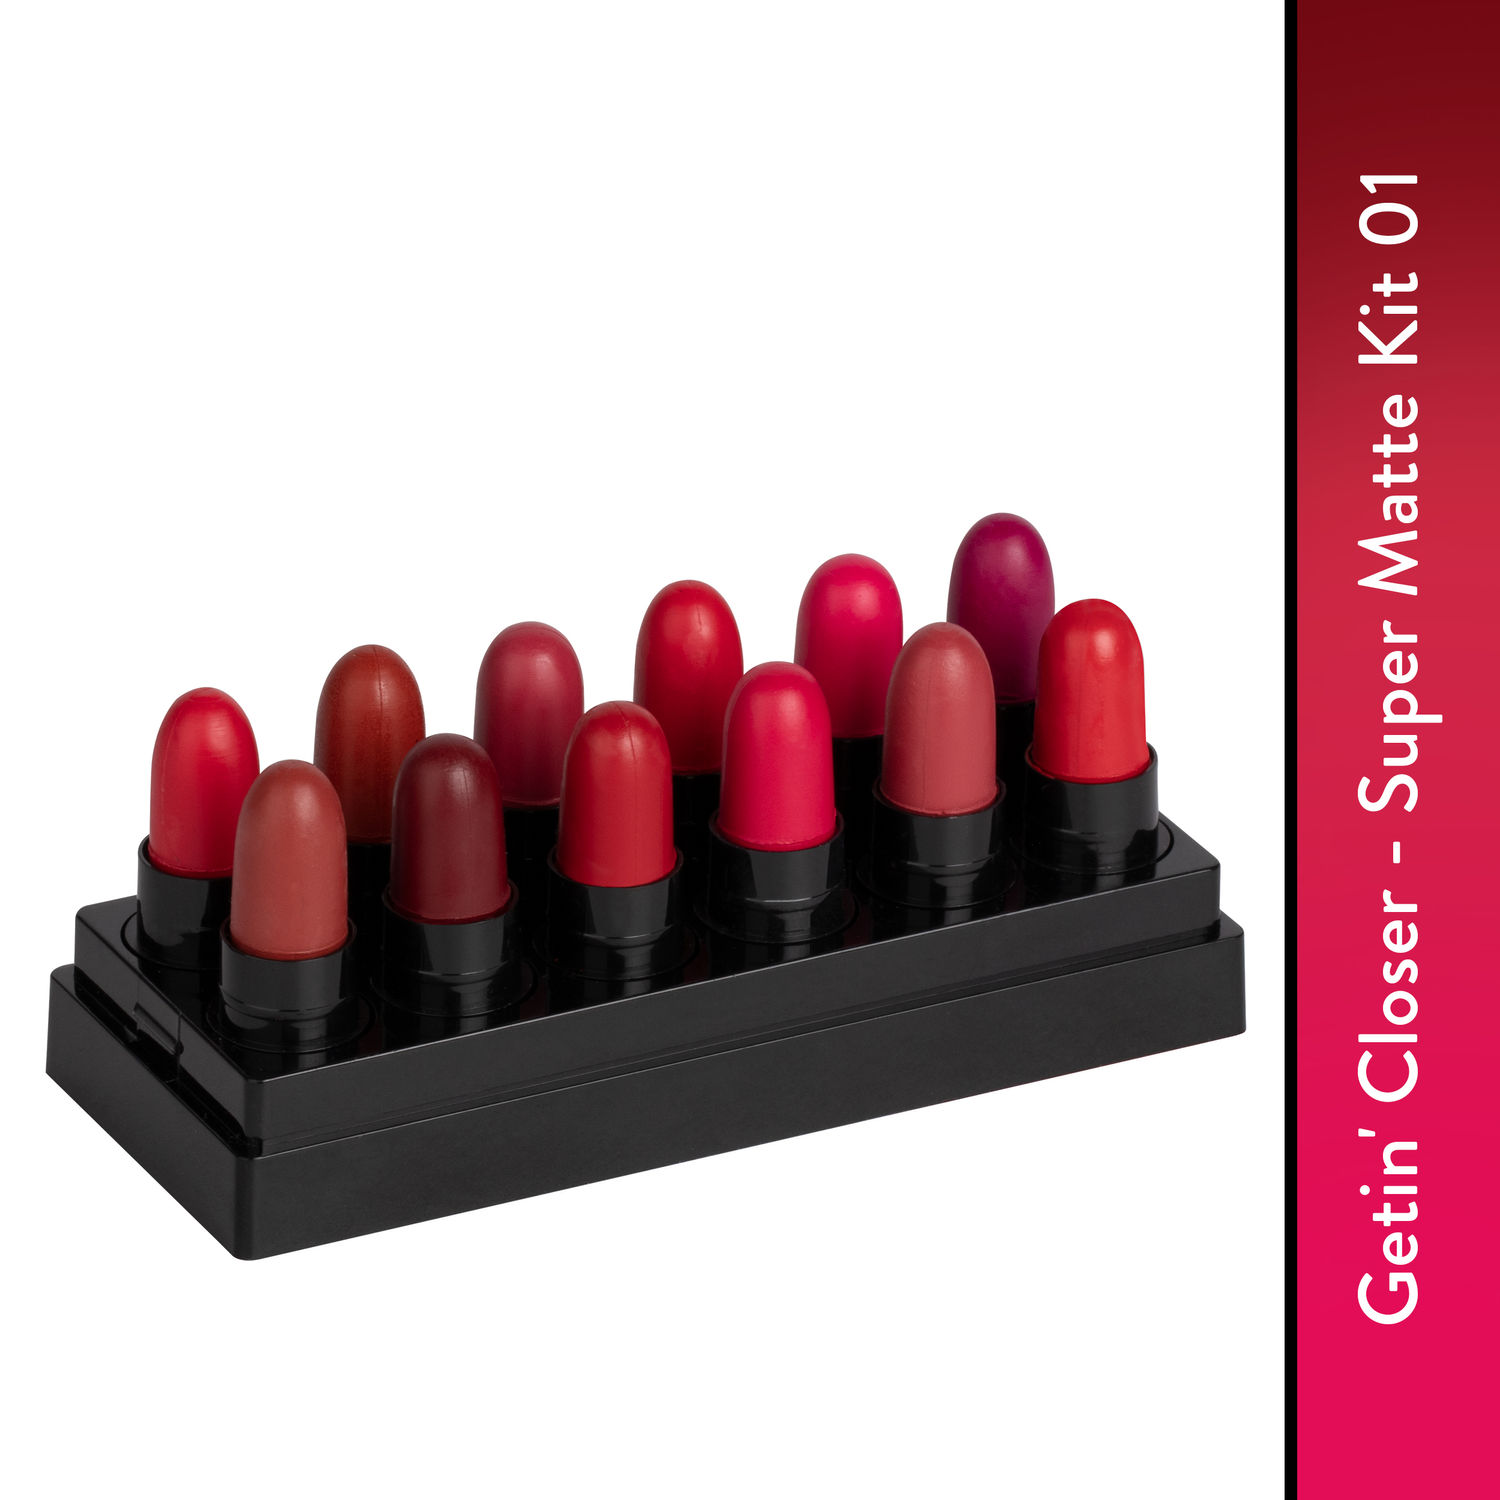 Buy Stay Quirky Lipstick Super Matte Minis|12 in 1|Long lasting|Smudgeproof|Multicolored| - Getin' Closer Set of 12 Mini Lipsticks Kit 1 (14.4 g) - Purplle